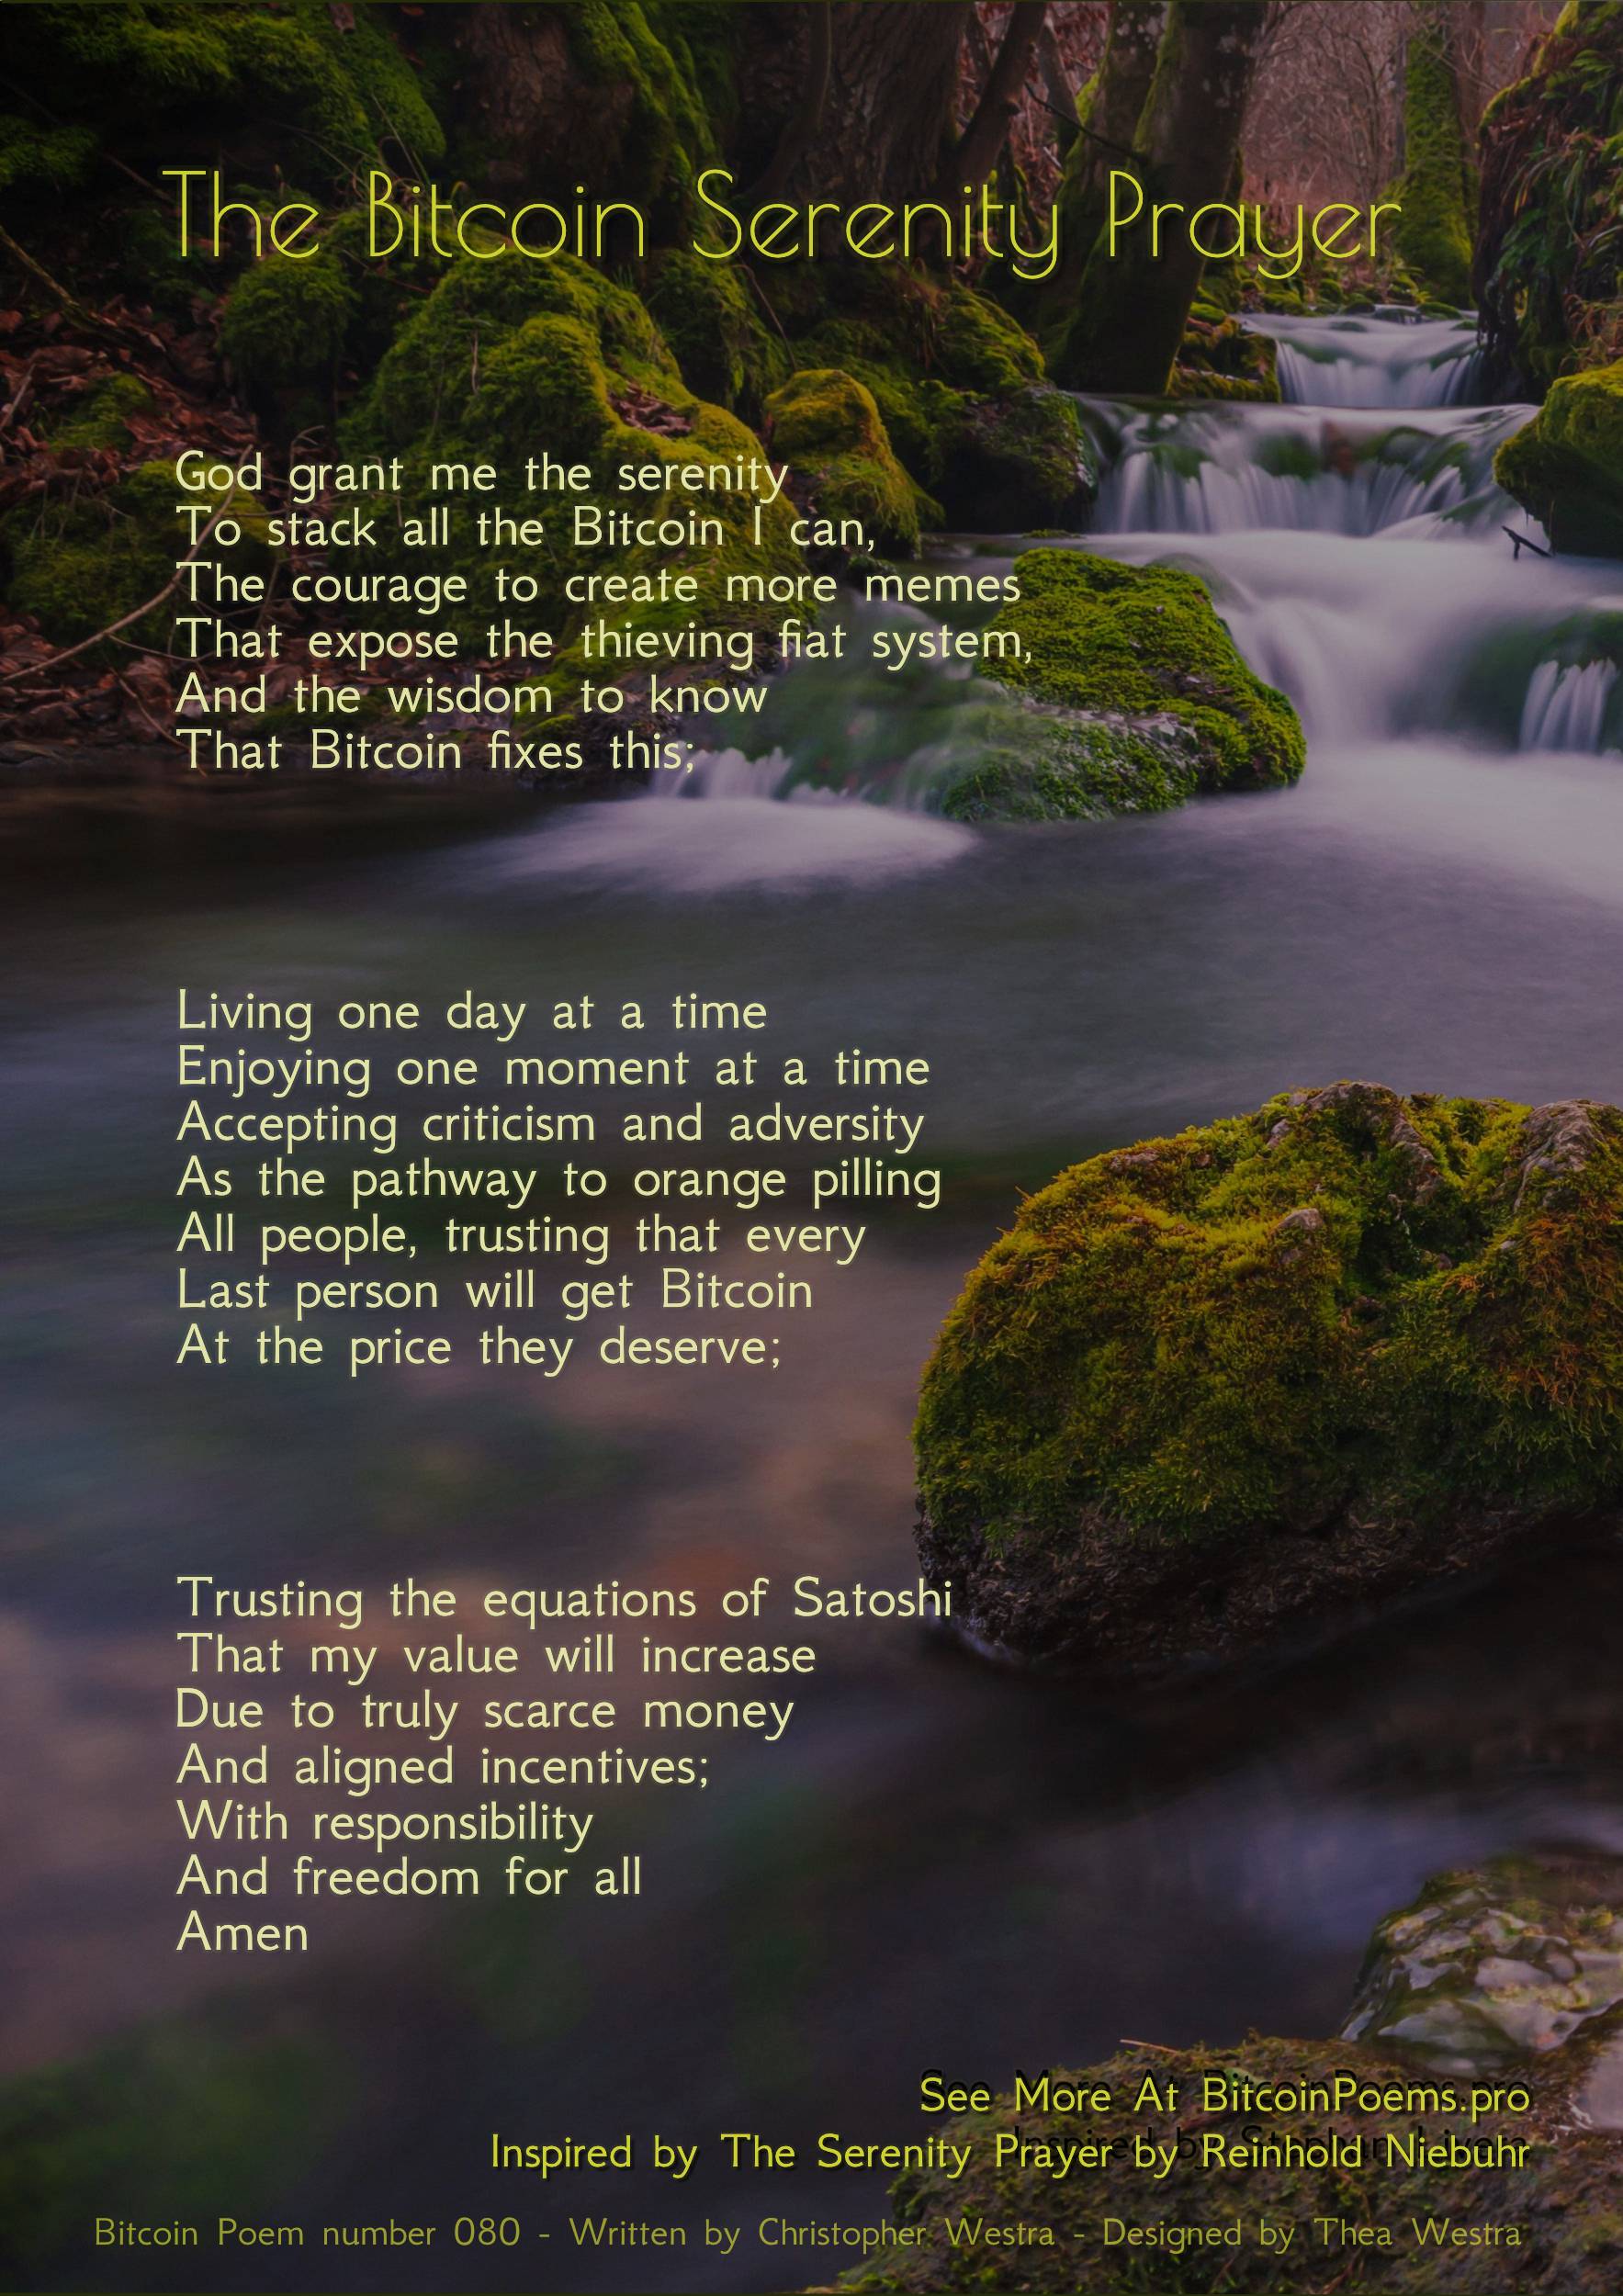 The Bitcoin Serenity Prayer - Bitcoin Poem 080 by Christopher Westra